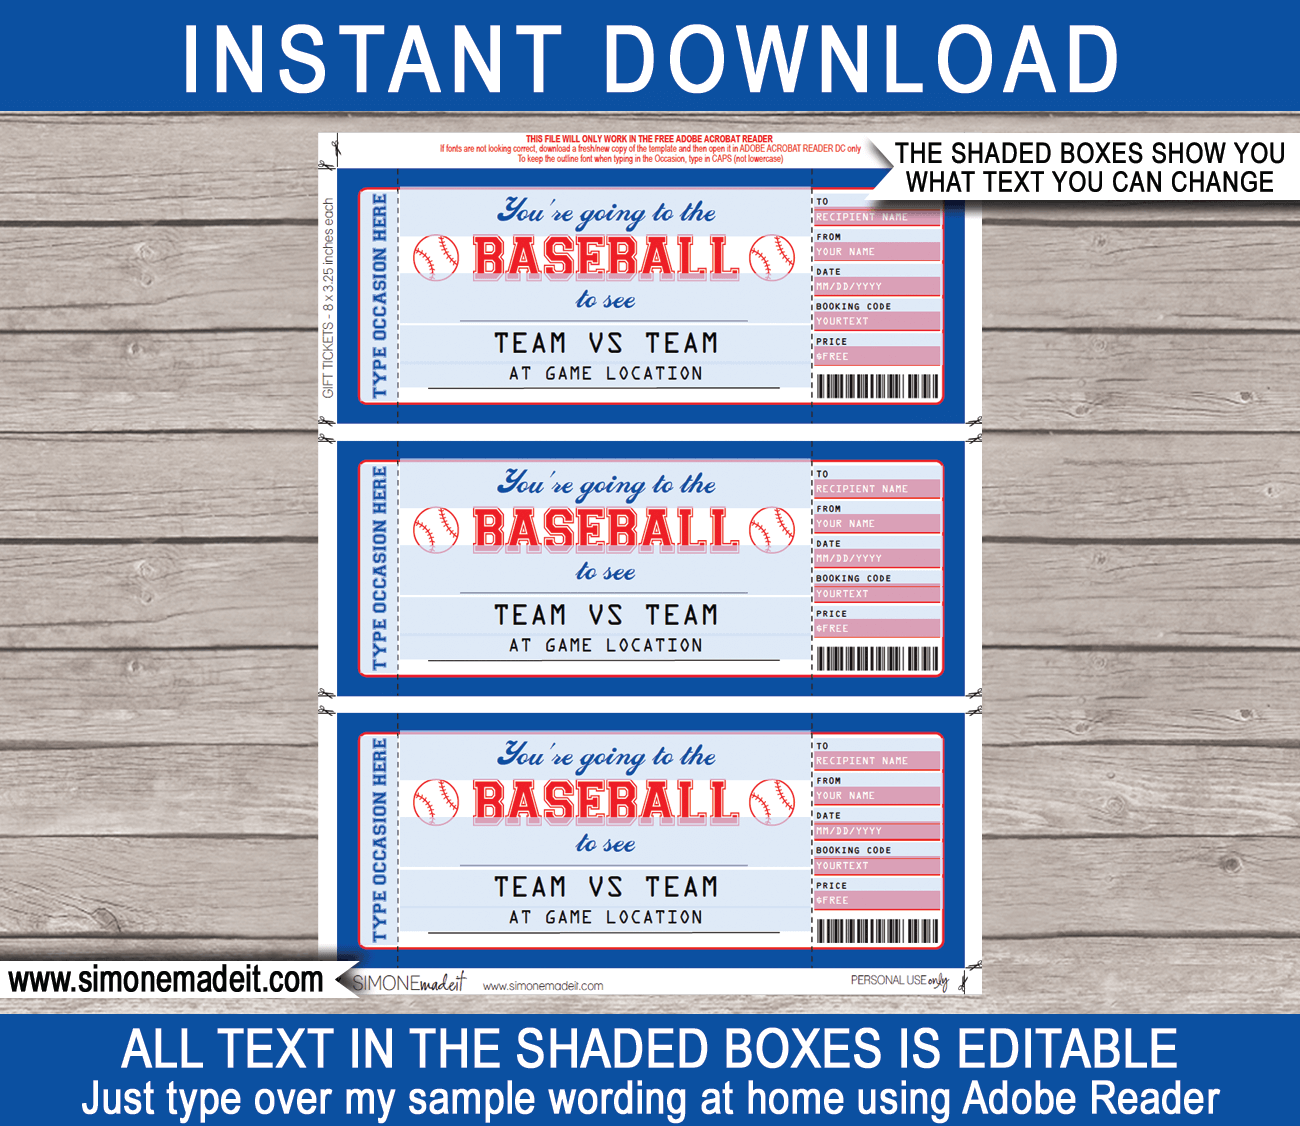 printable red sox tickets